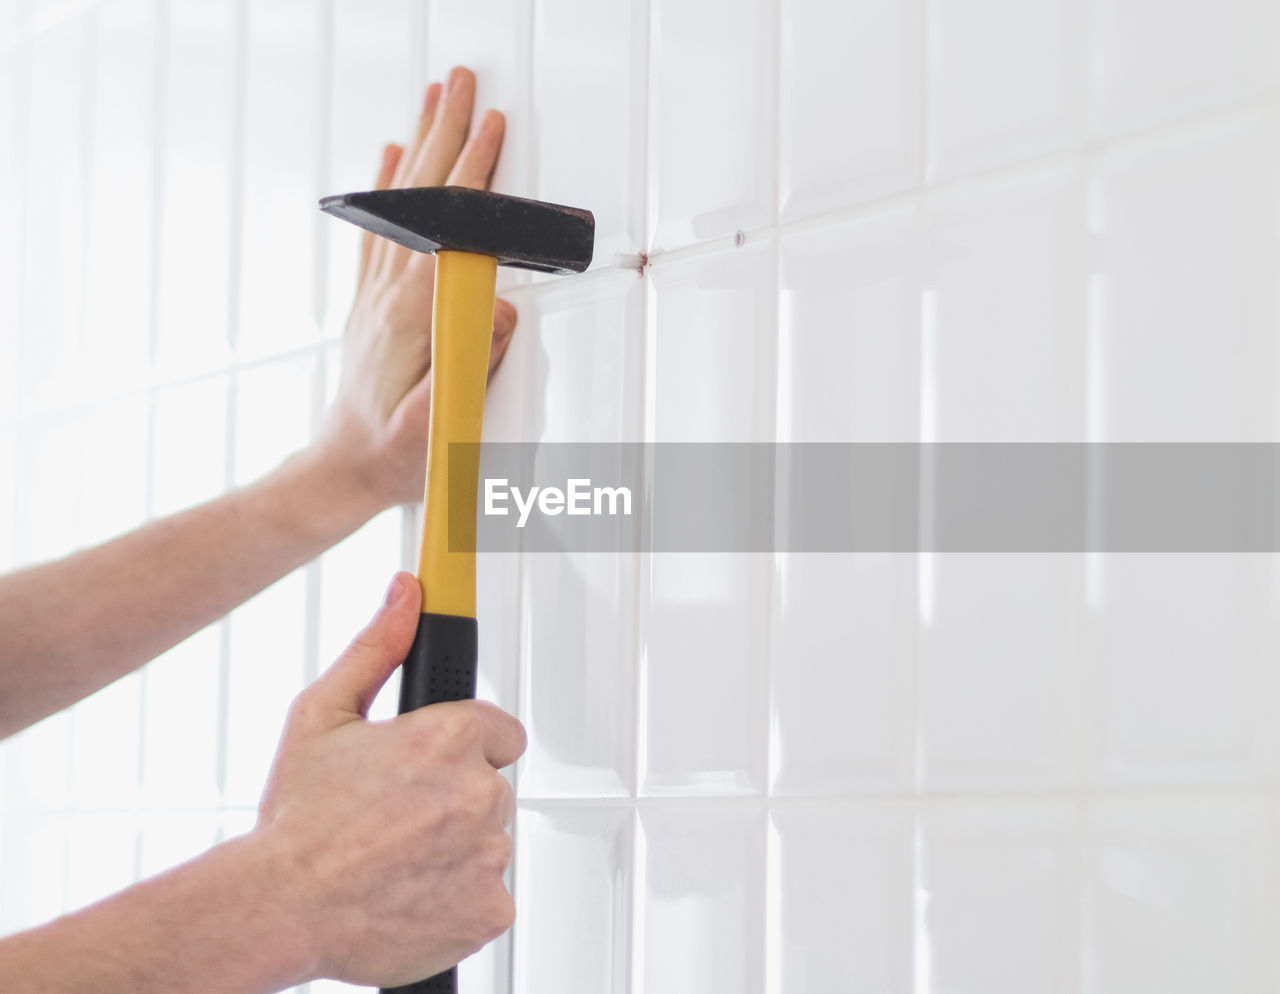 The hands of a young caucasian guy hammer a dowel into a drilled hole on a tiled wall